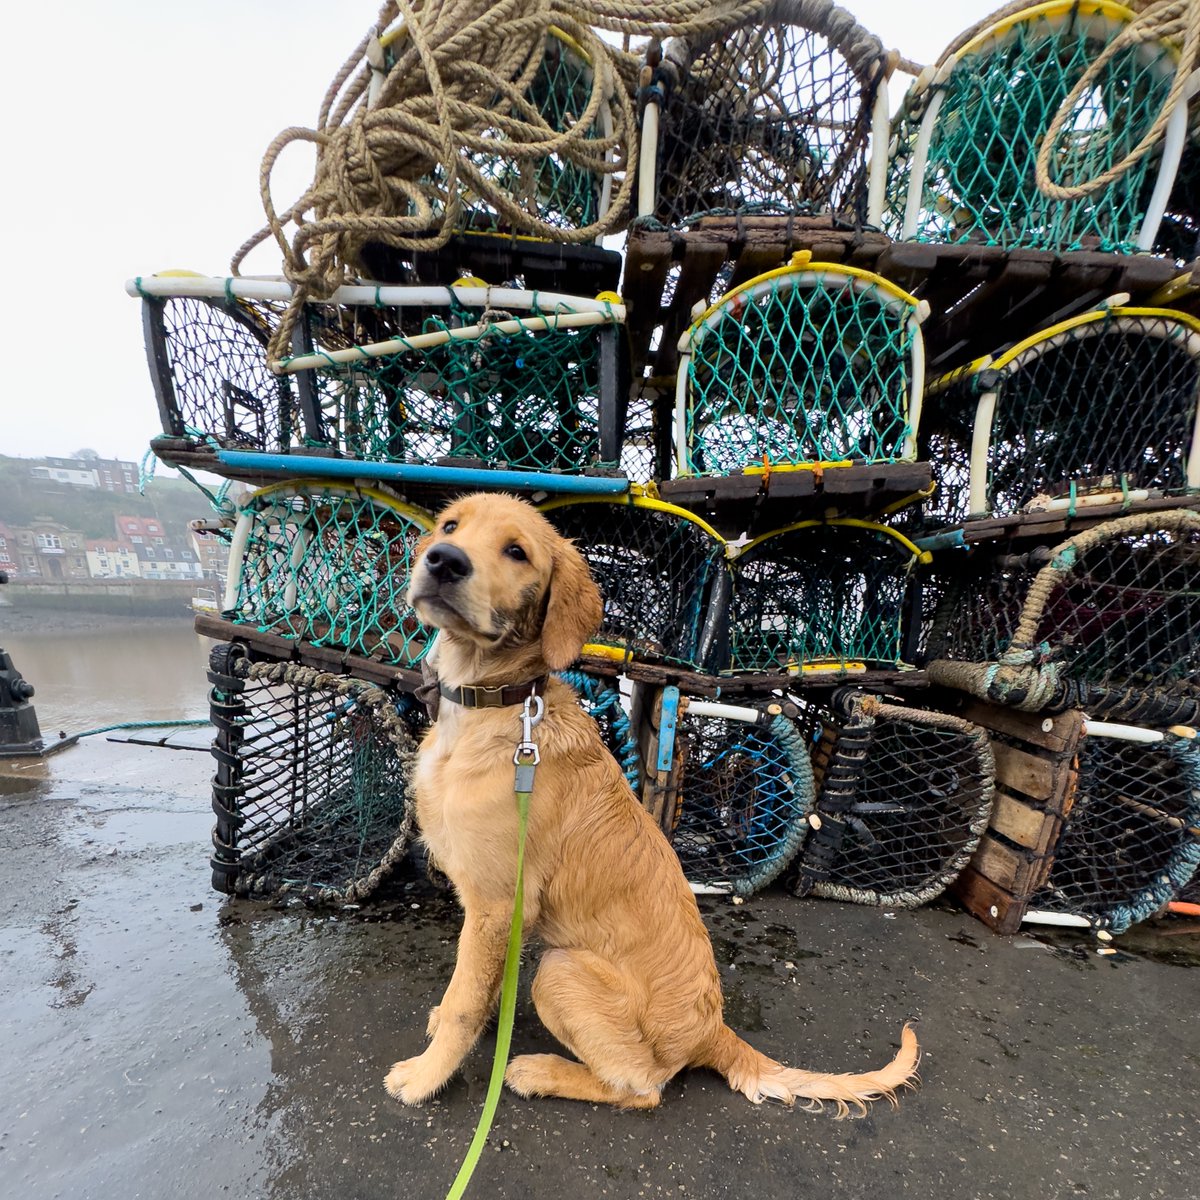 Finlay checking out #WhitbyHarbour for a day out at the #seaside #goldenretriever #puppyphotos #northyorkshire #goldenpuppy #harbour #seasideharbour #fishing #fishboating #fishingpots #puppywalks #whitby #yorkshire #daysout #yorkshiredaysout #redmoonshine